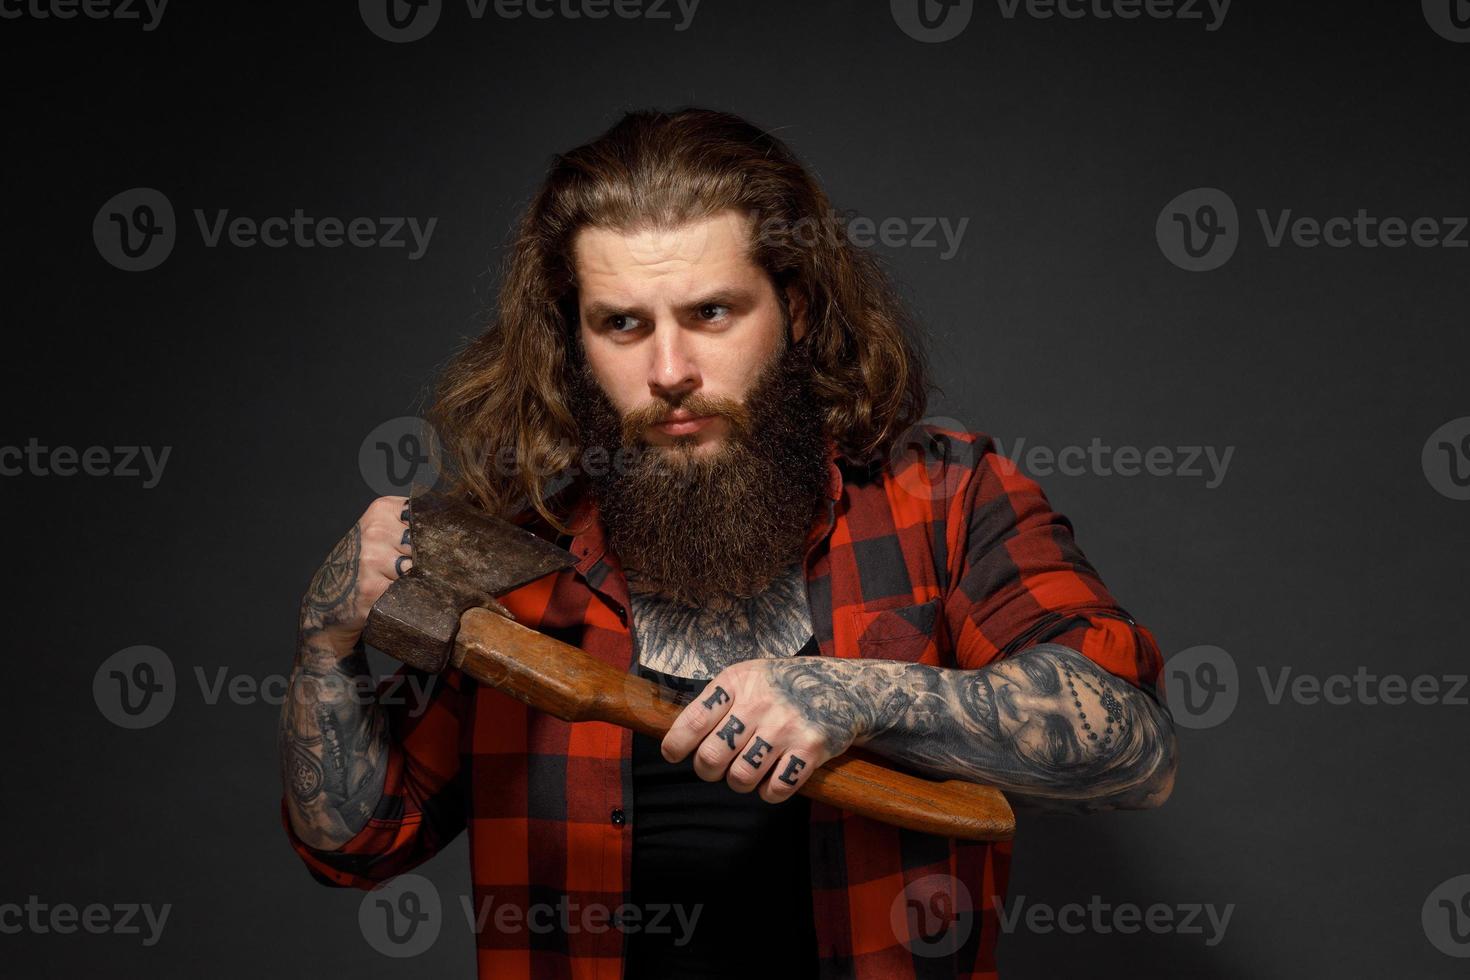 handsome man with long hair cuts his hair with an ax like a barbershop photo